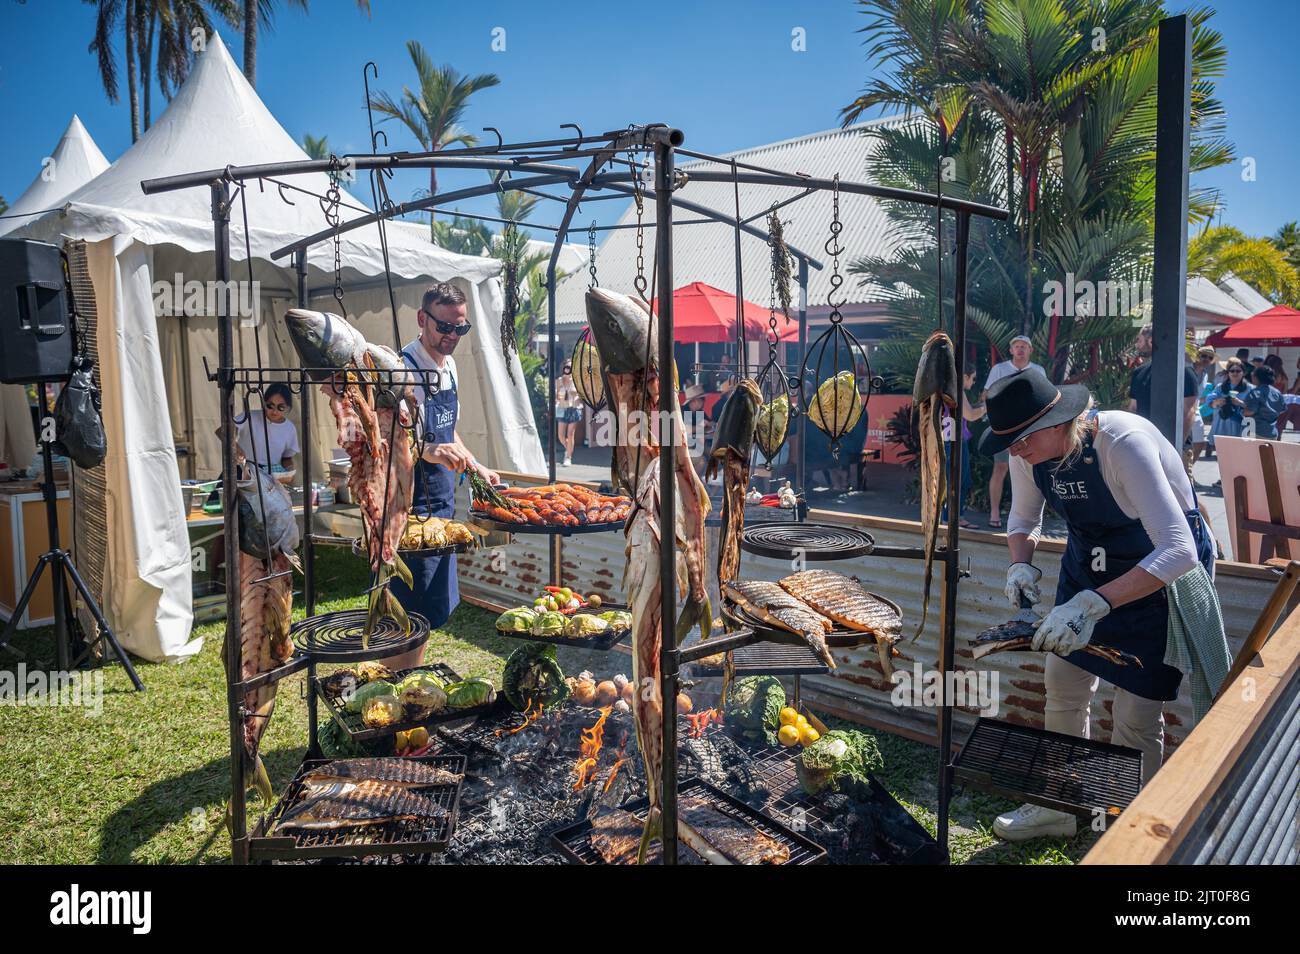 Two cooks roasting fish and varied vegetables over an open flame barbecue at Taste Port Douglas food & drink Festival in Australia. Stock Photo